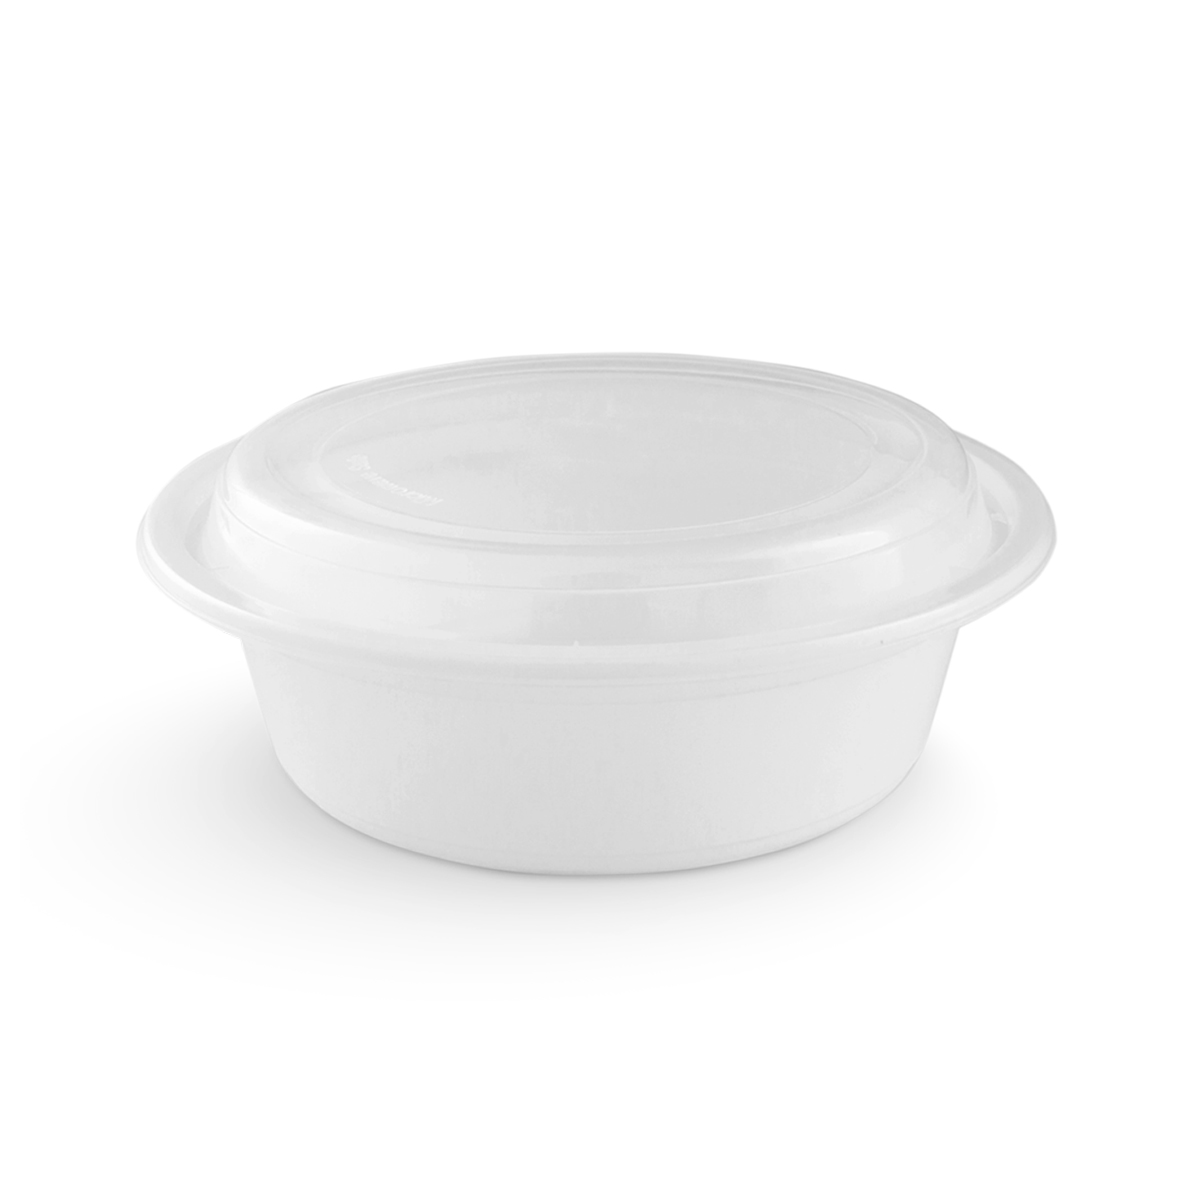 Microwave Containers with Lid (16 oz, Round Shape, White Colour)